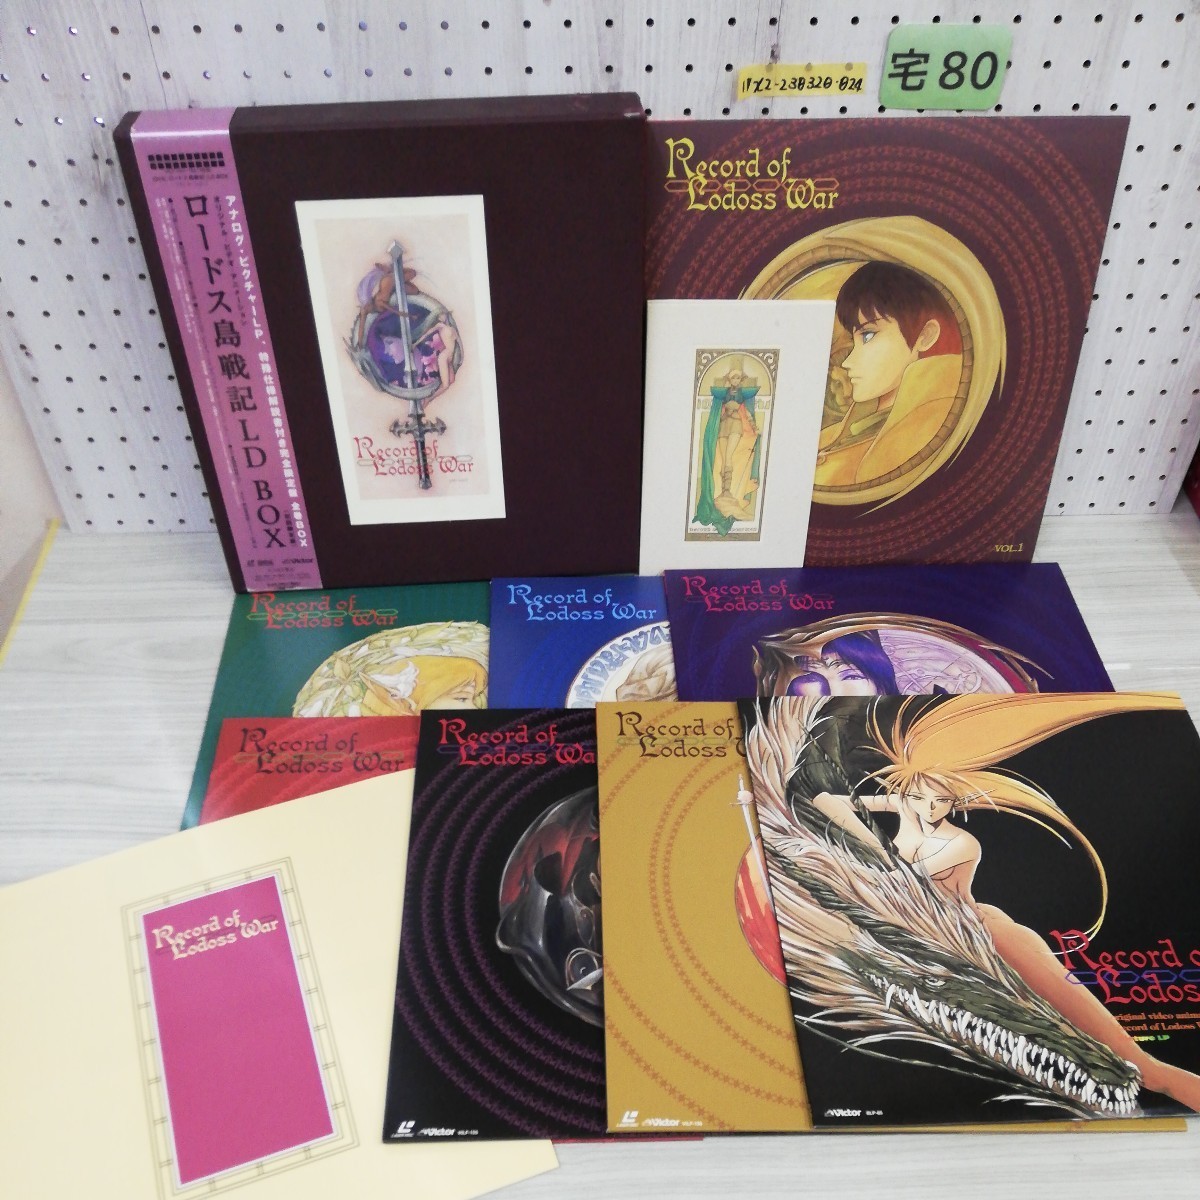 1-V LD Record of Lodoss War the first times limitation record the whole BOX analogue Picture LP obi equipped . scratch equipped 7 sheets set 12 surface original video animation 